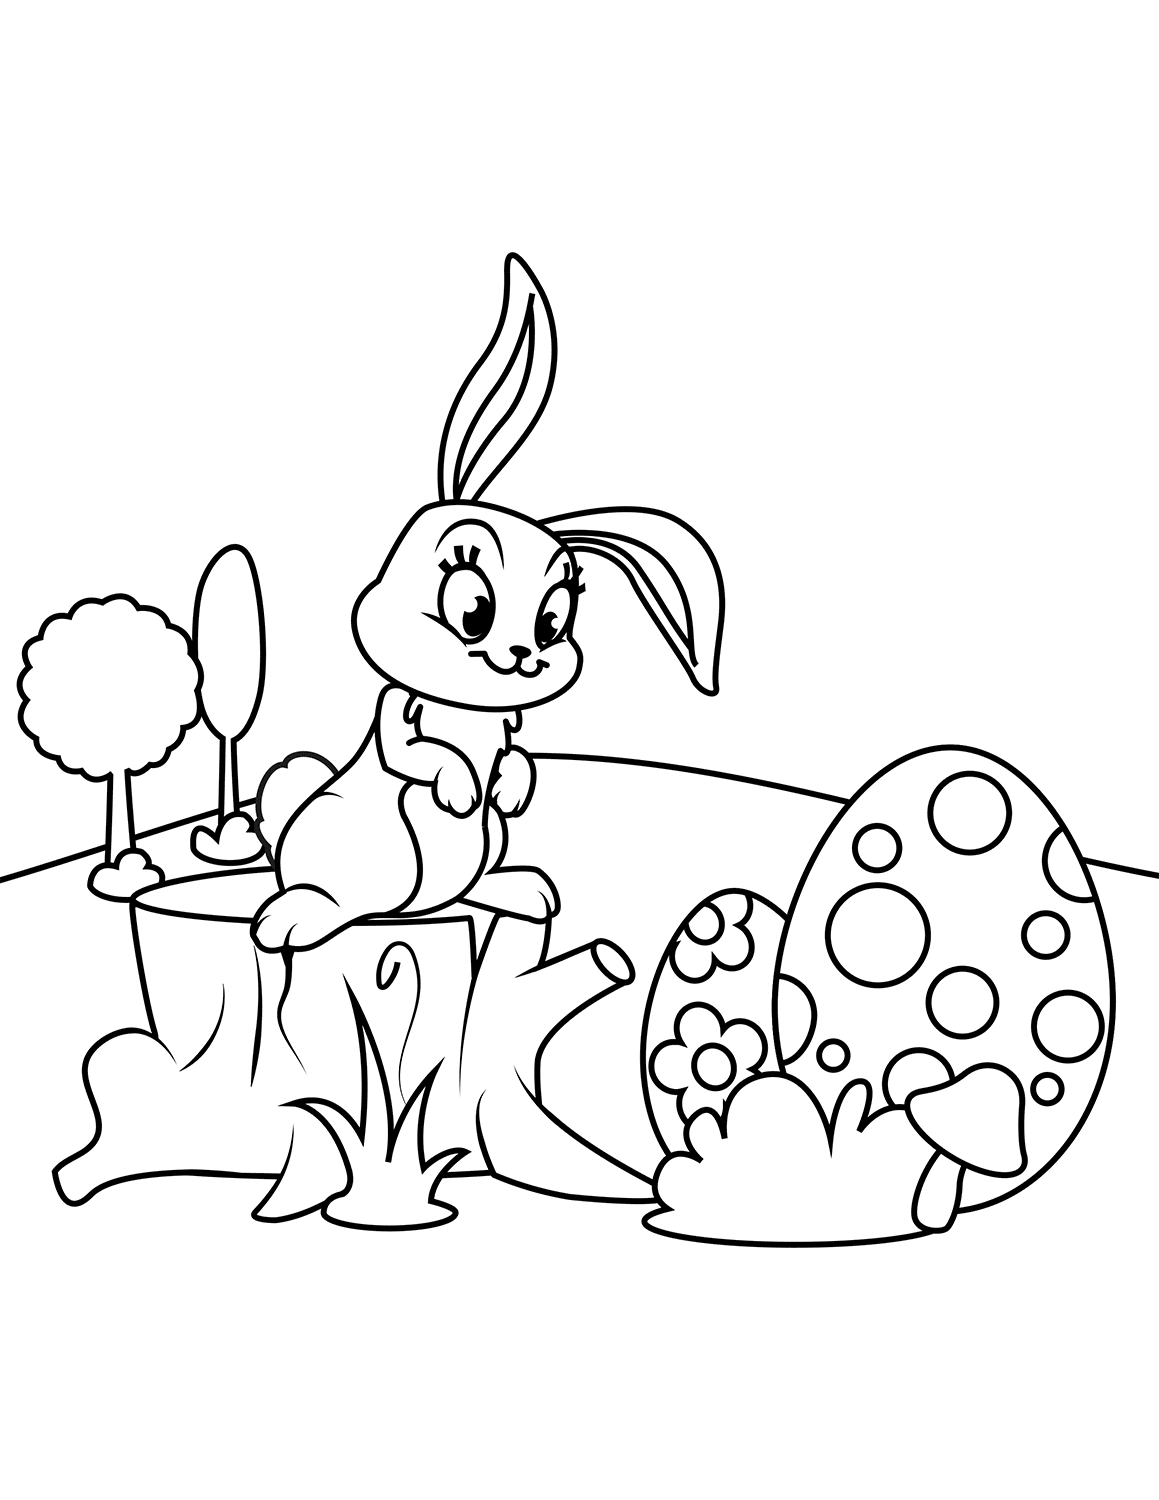 Cute Easter Bunny On Hemp Coloring Page